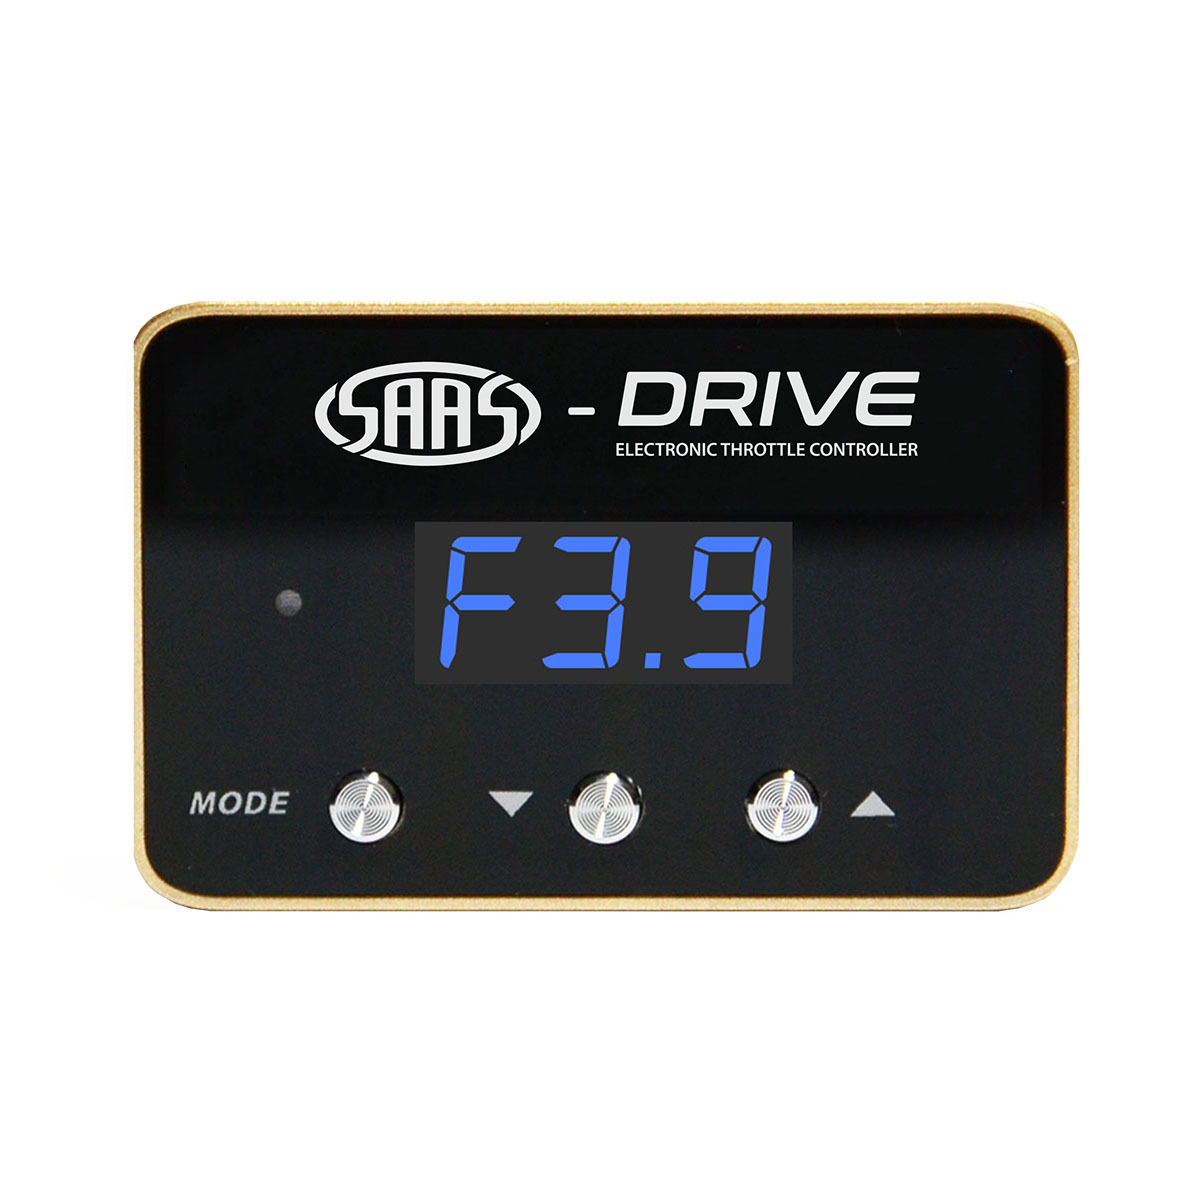 SAAS-Drive Ford Mustang 5th Gen 2005 - 2014 Throttle Controller 